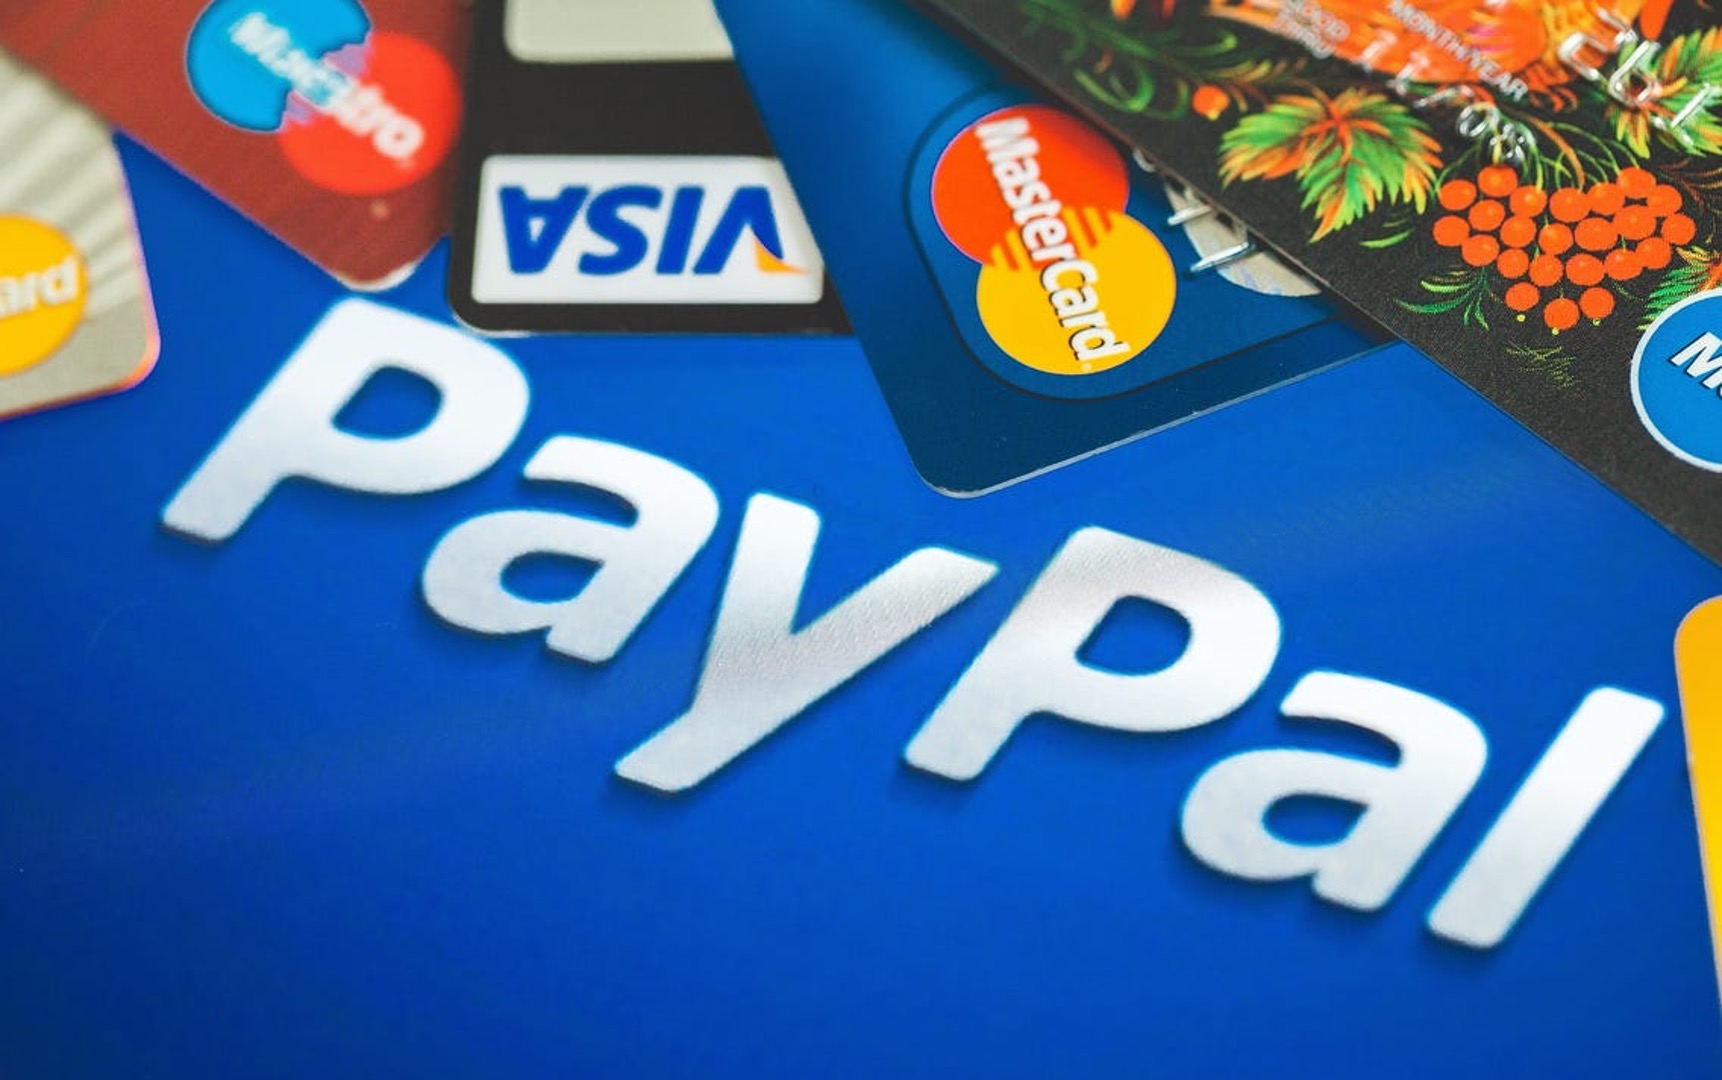 How To Use PayPal With Debit Card